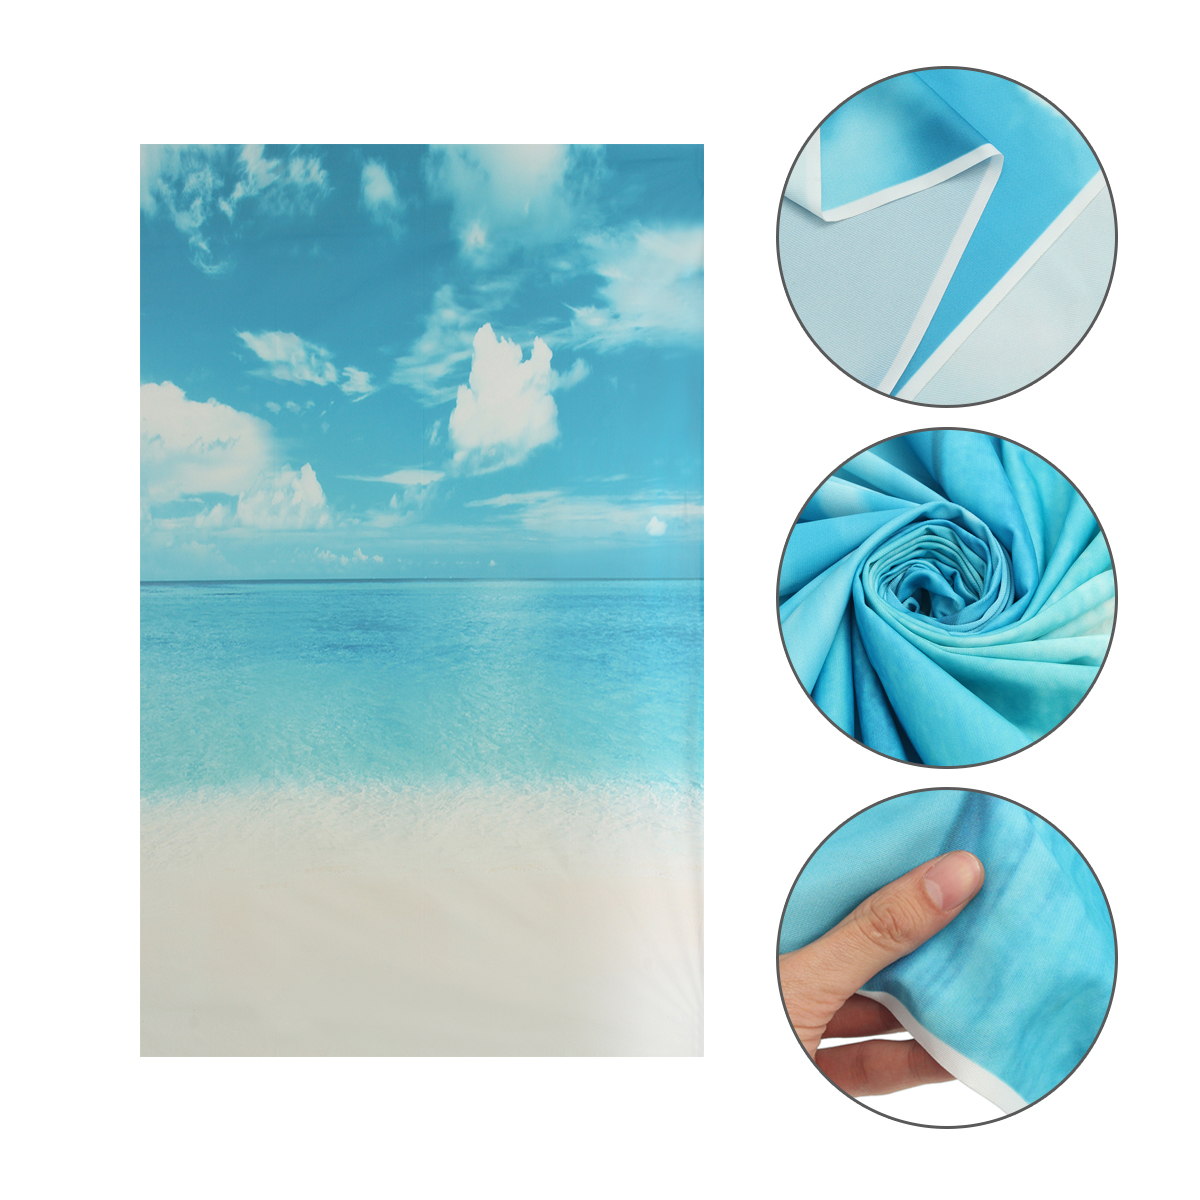 New-Durable-5x7ft-Cotton-Photography-Backdrop-Seaside-Beach-Background-Studio-Props-1952558-1